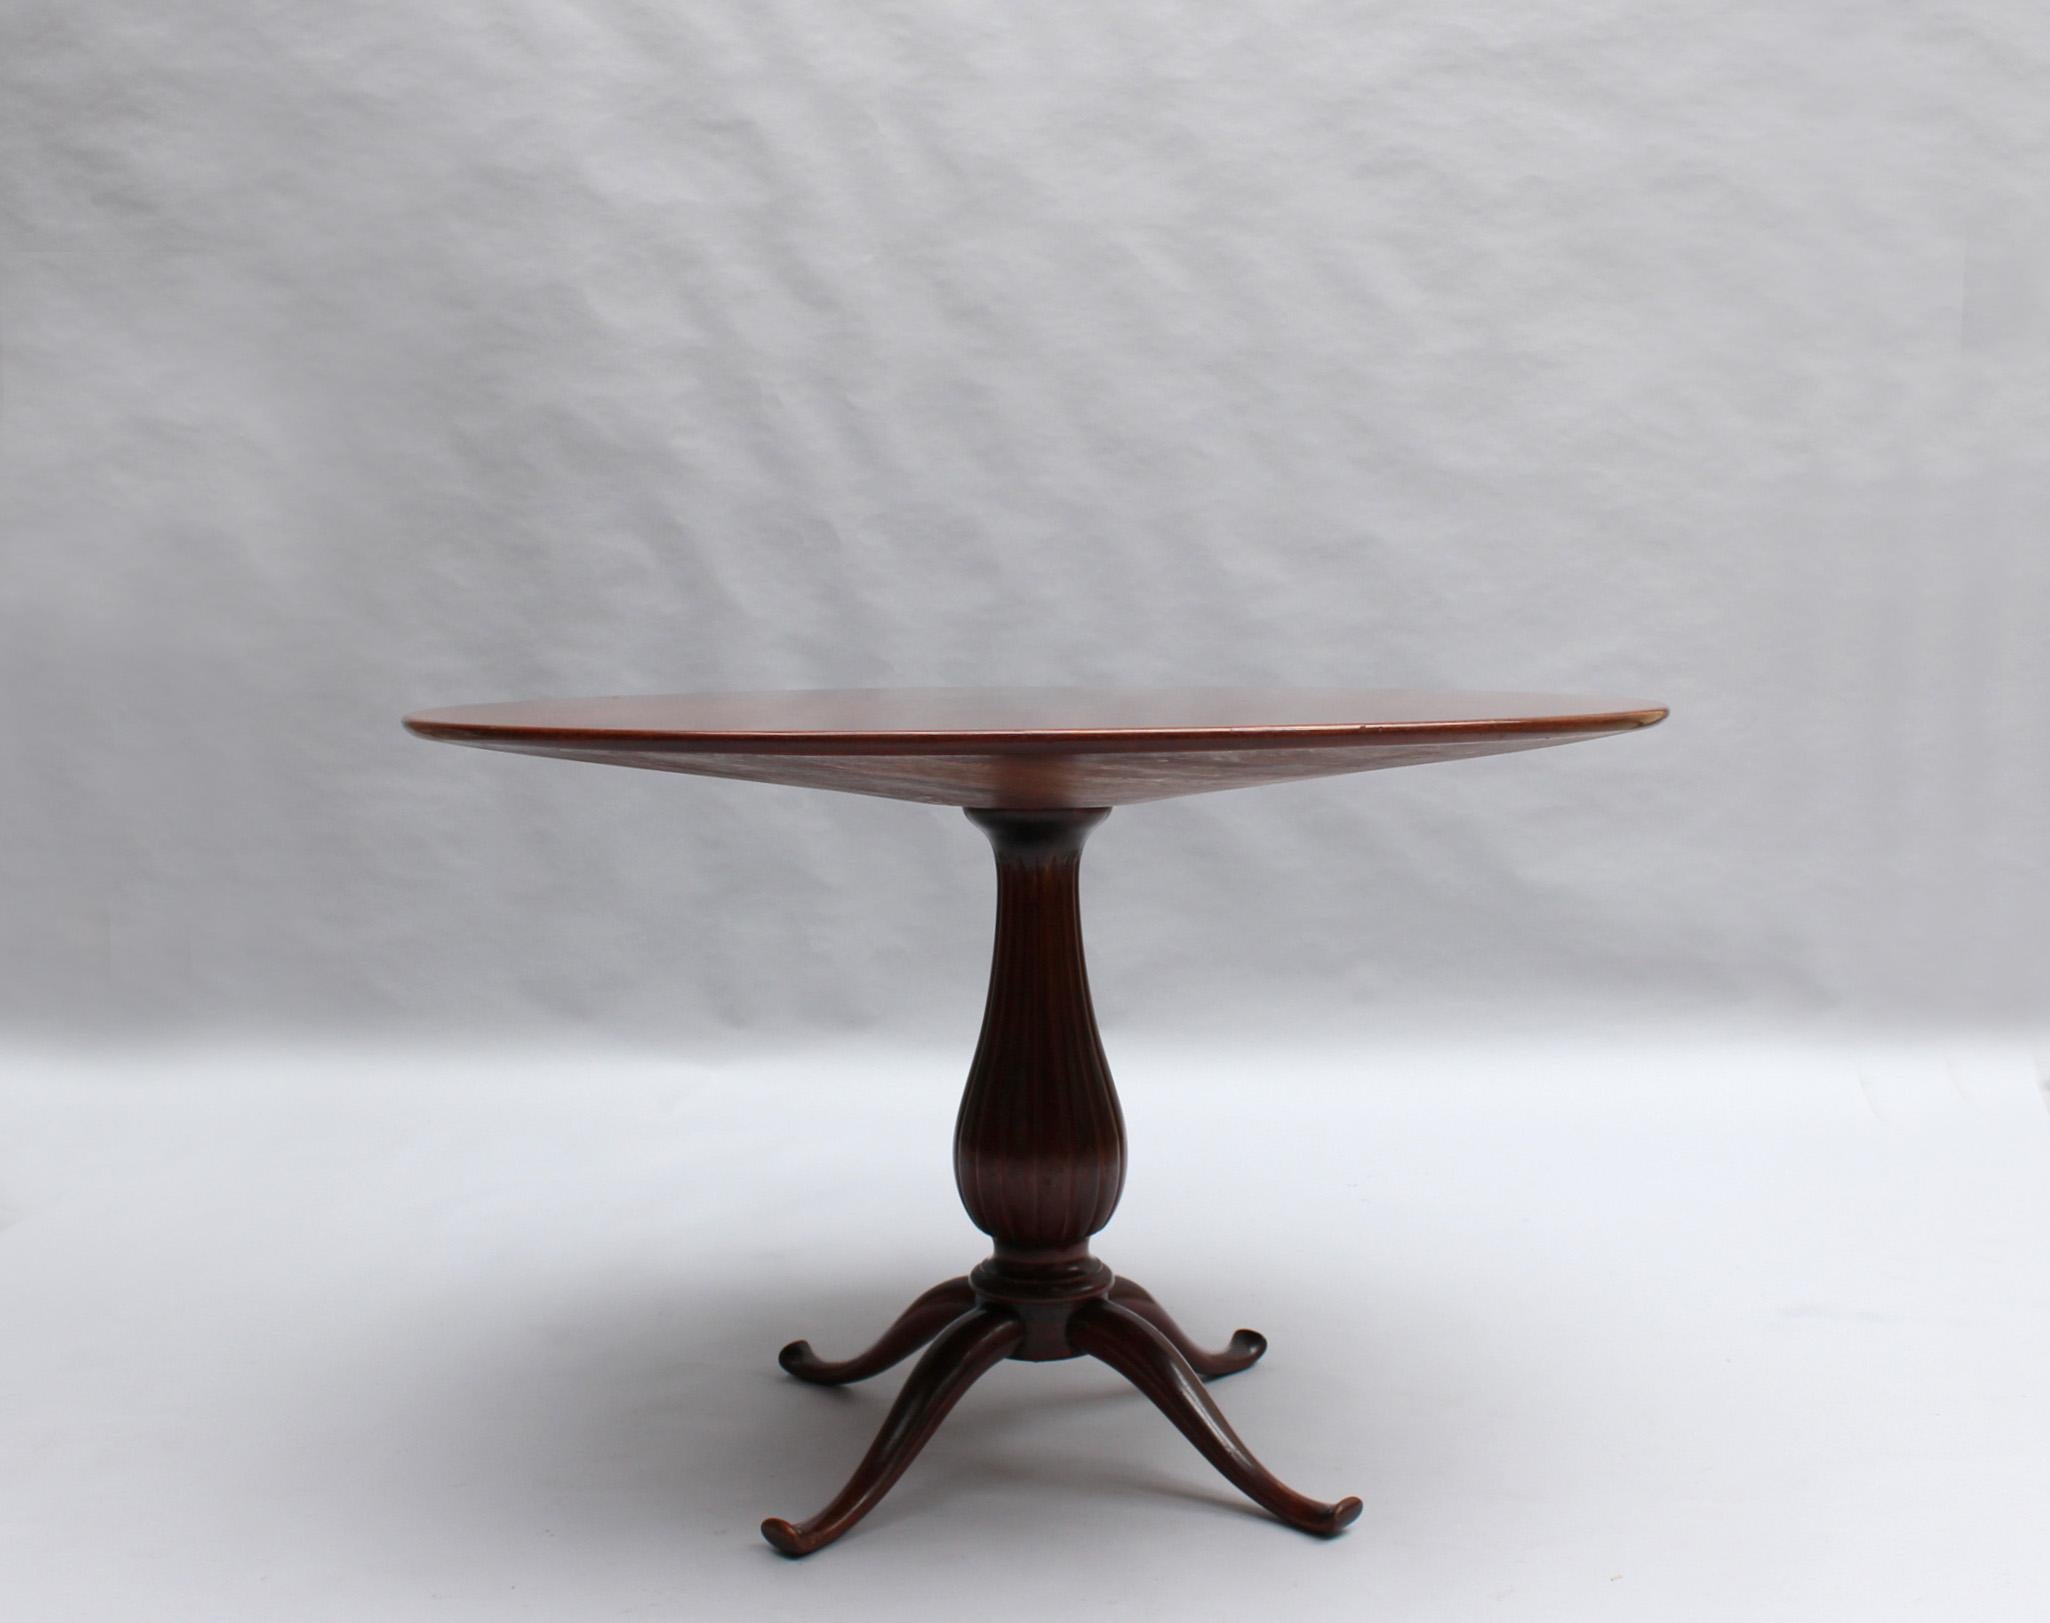 Paolo Buffa (attributed to) - A fine 1940s mahogany round table with a four legs pedestal.